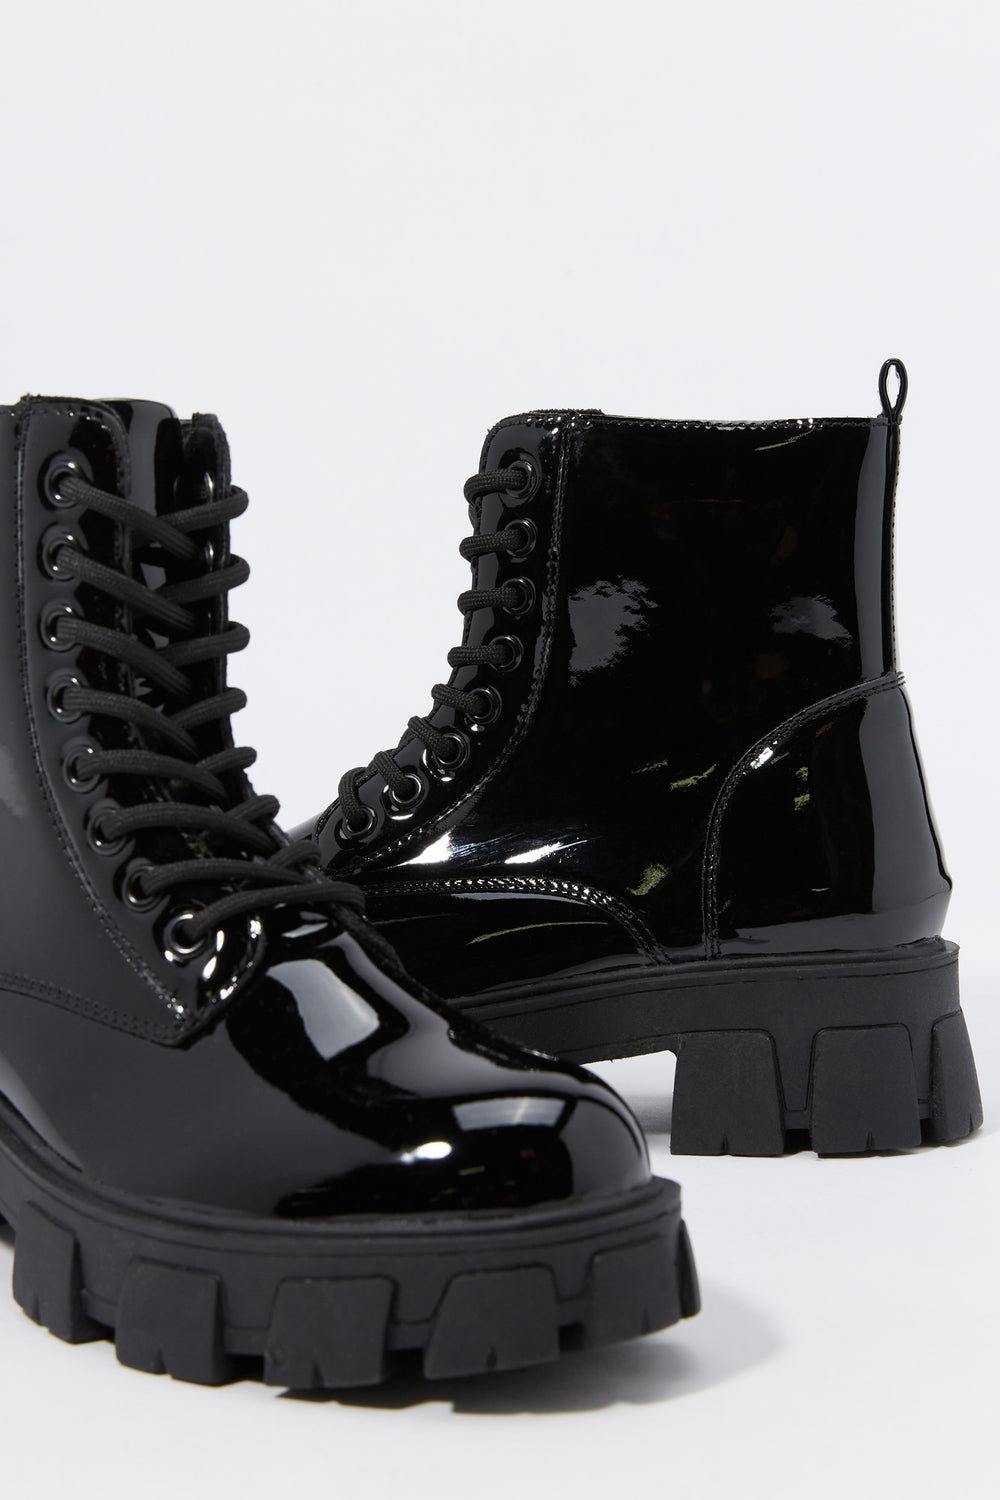 Black Faux Leather Lace Up Boot Black Faux Leather Lace Up Boot 4